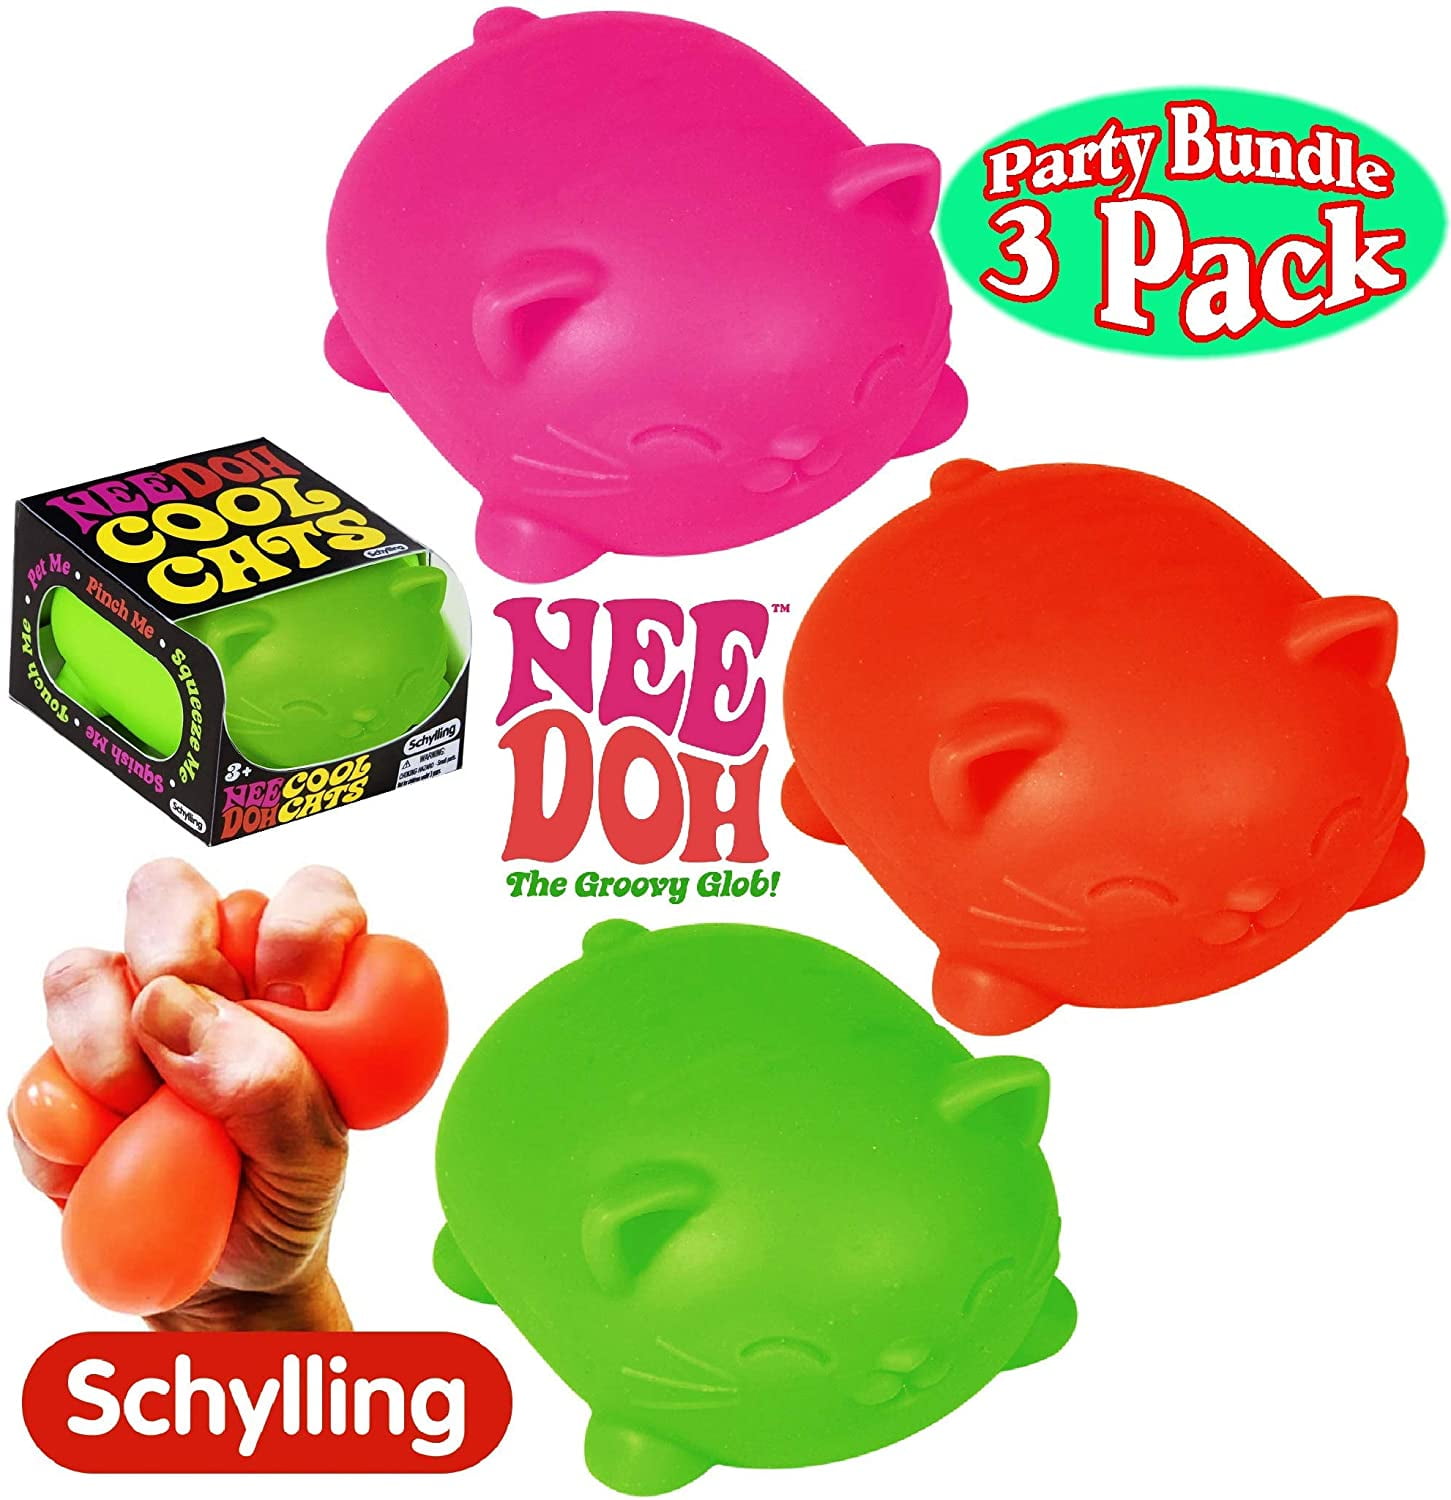 Schylling Pink NeeDoh Gum Ball Squishy Stretchy Stress Balls Gift Set Bundle 2 Pack Squeezy 